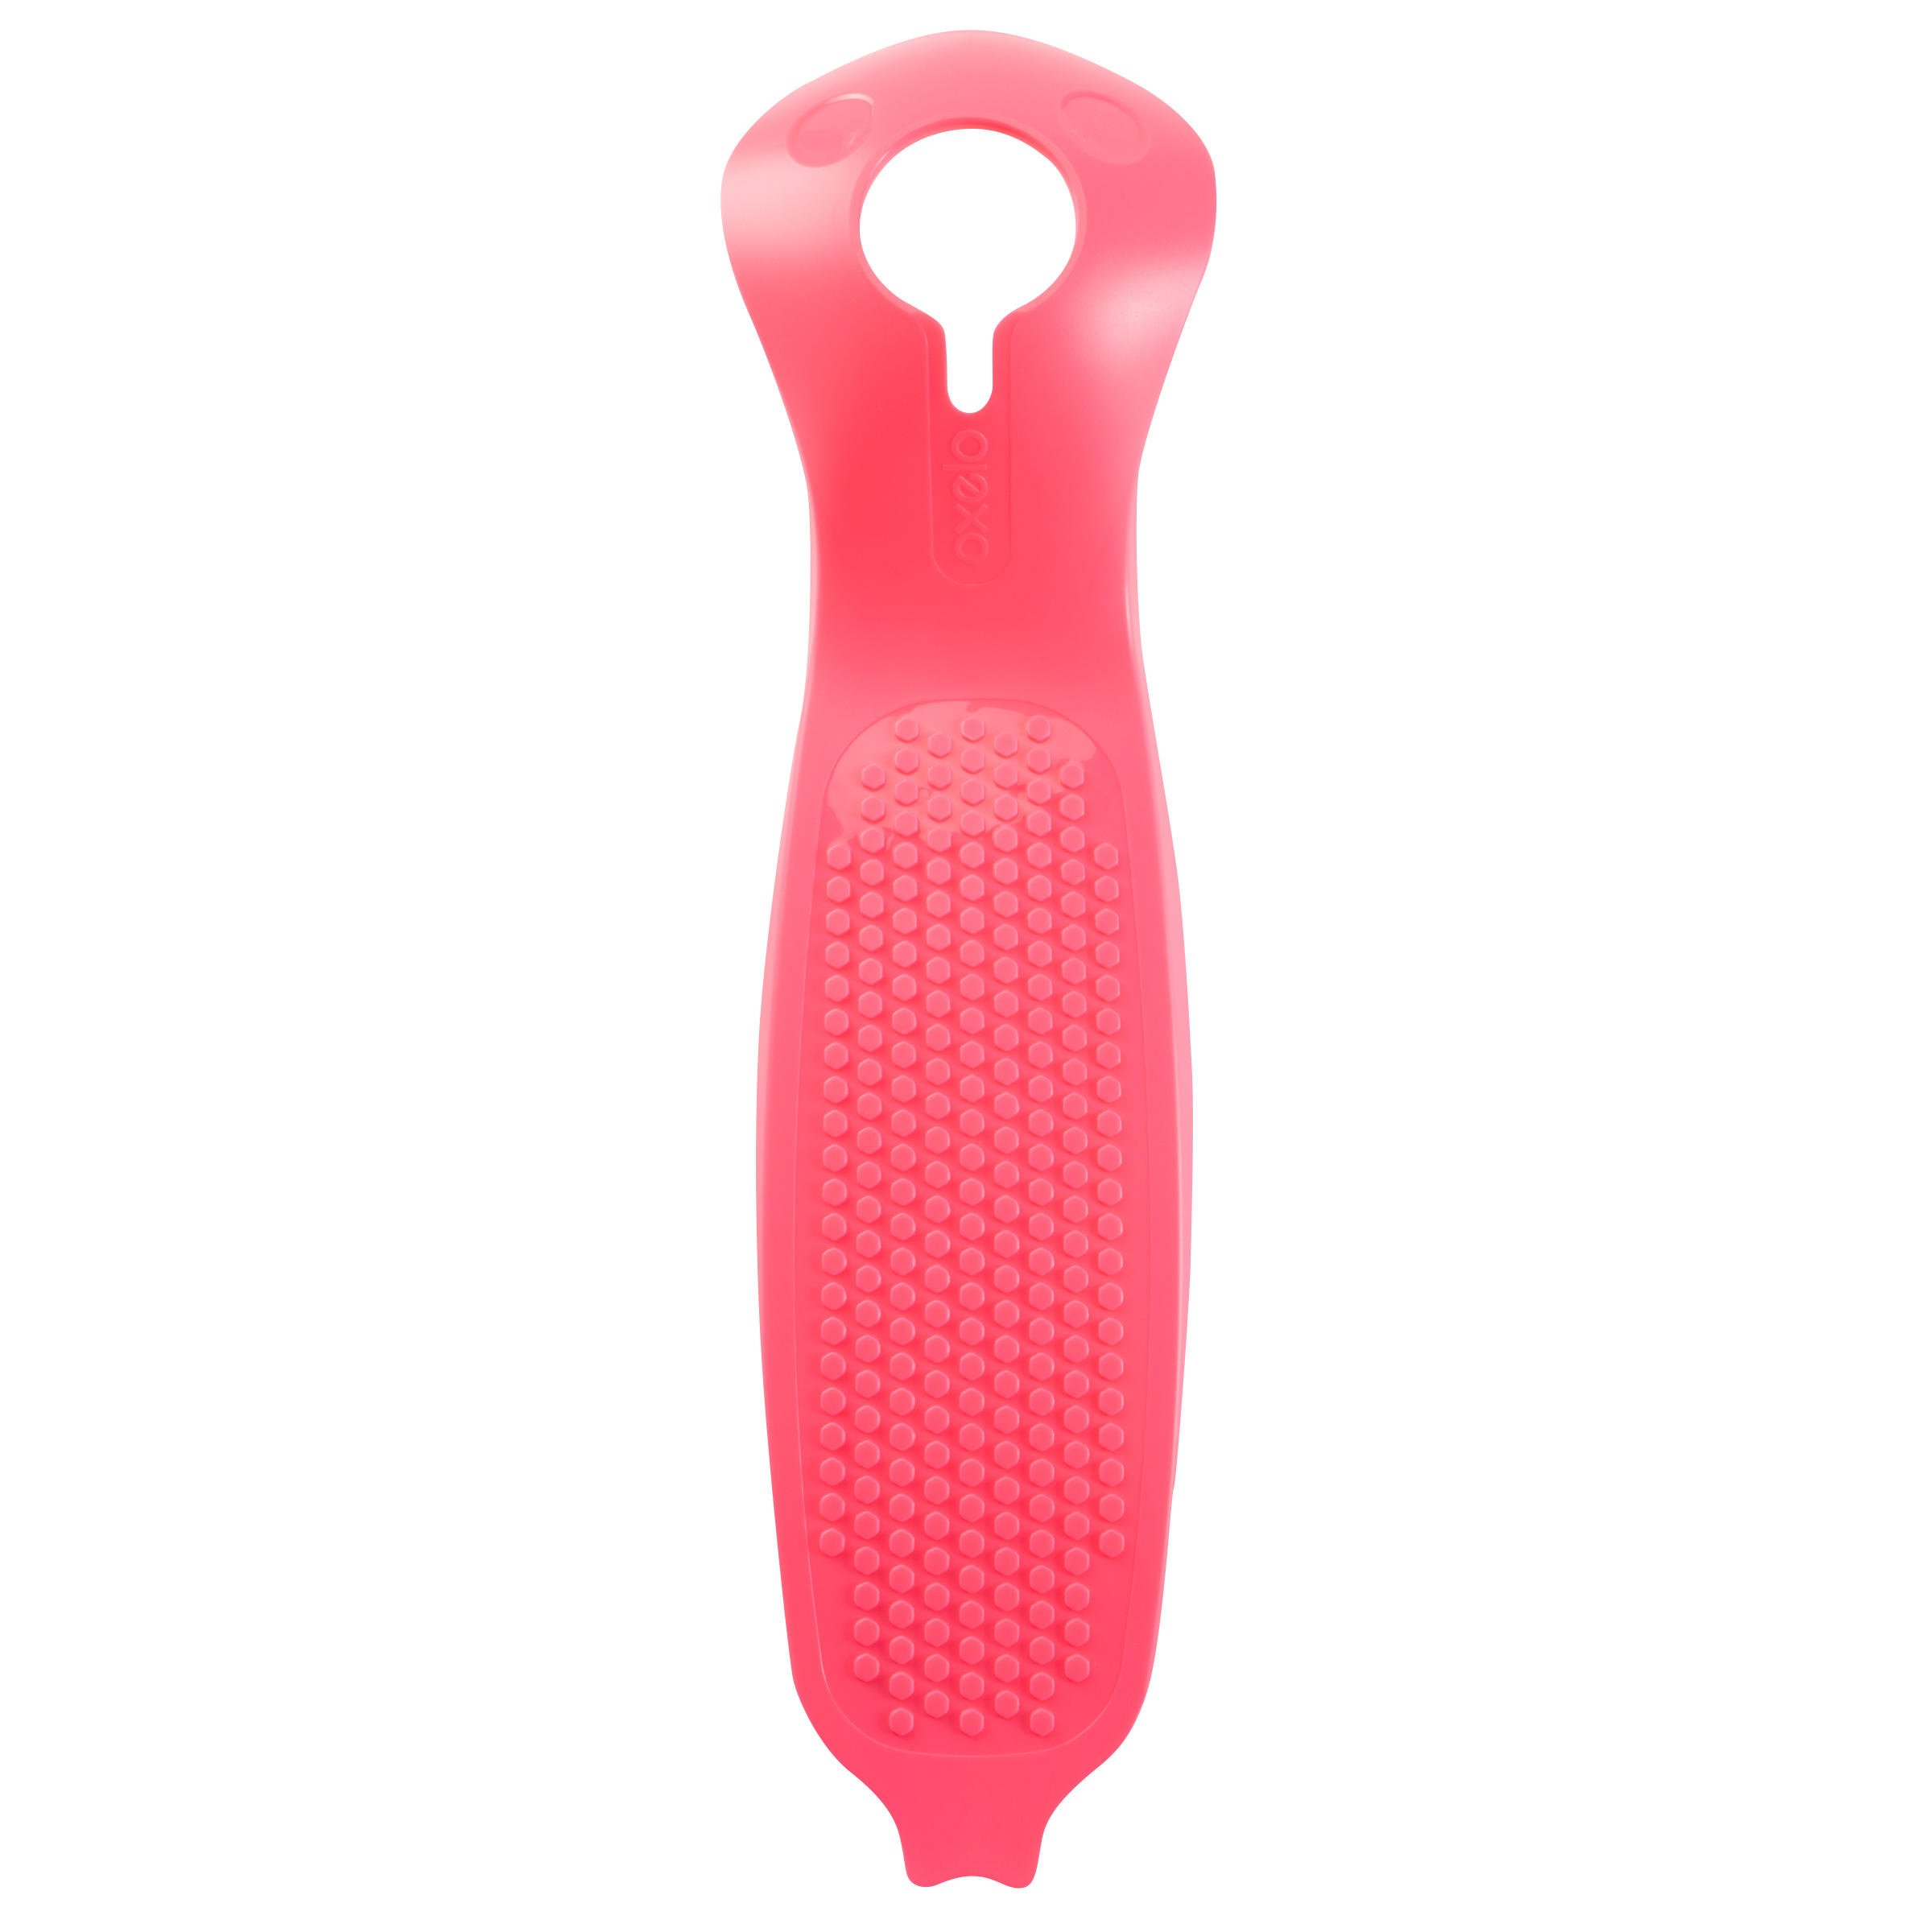 B1 Scooter Shell - Neon Pink 1/4